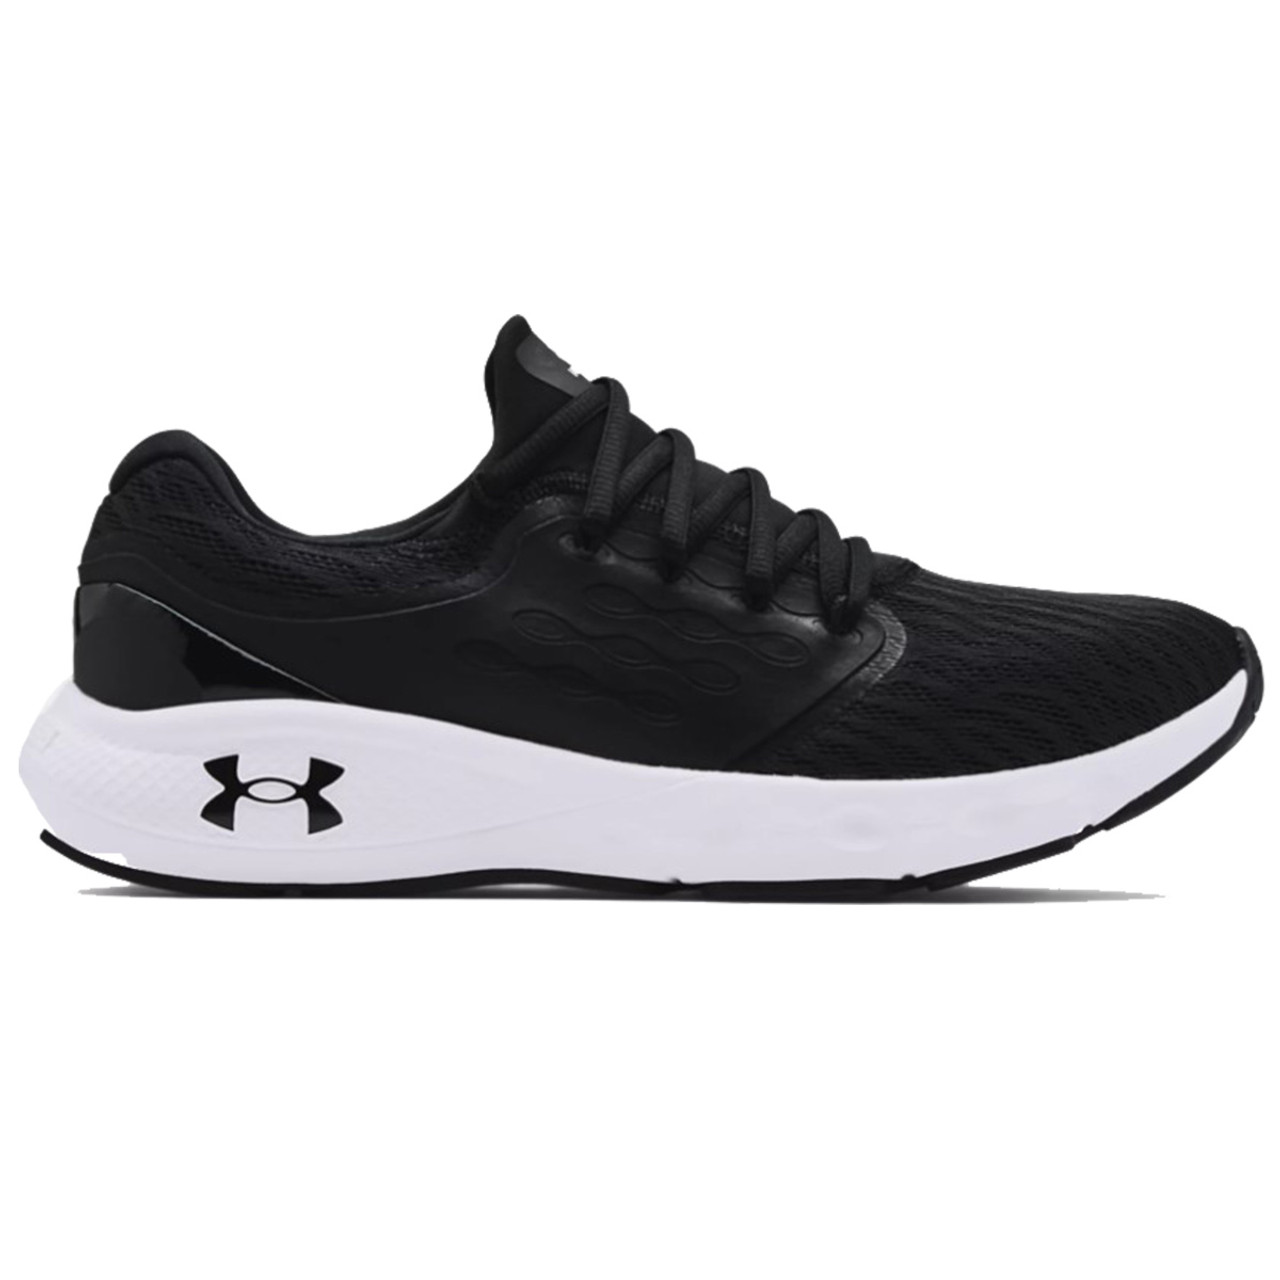 Under Armour Men's Charged Vantage Running Shoes | Rogers Sporting Goods